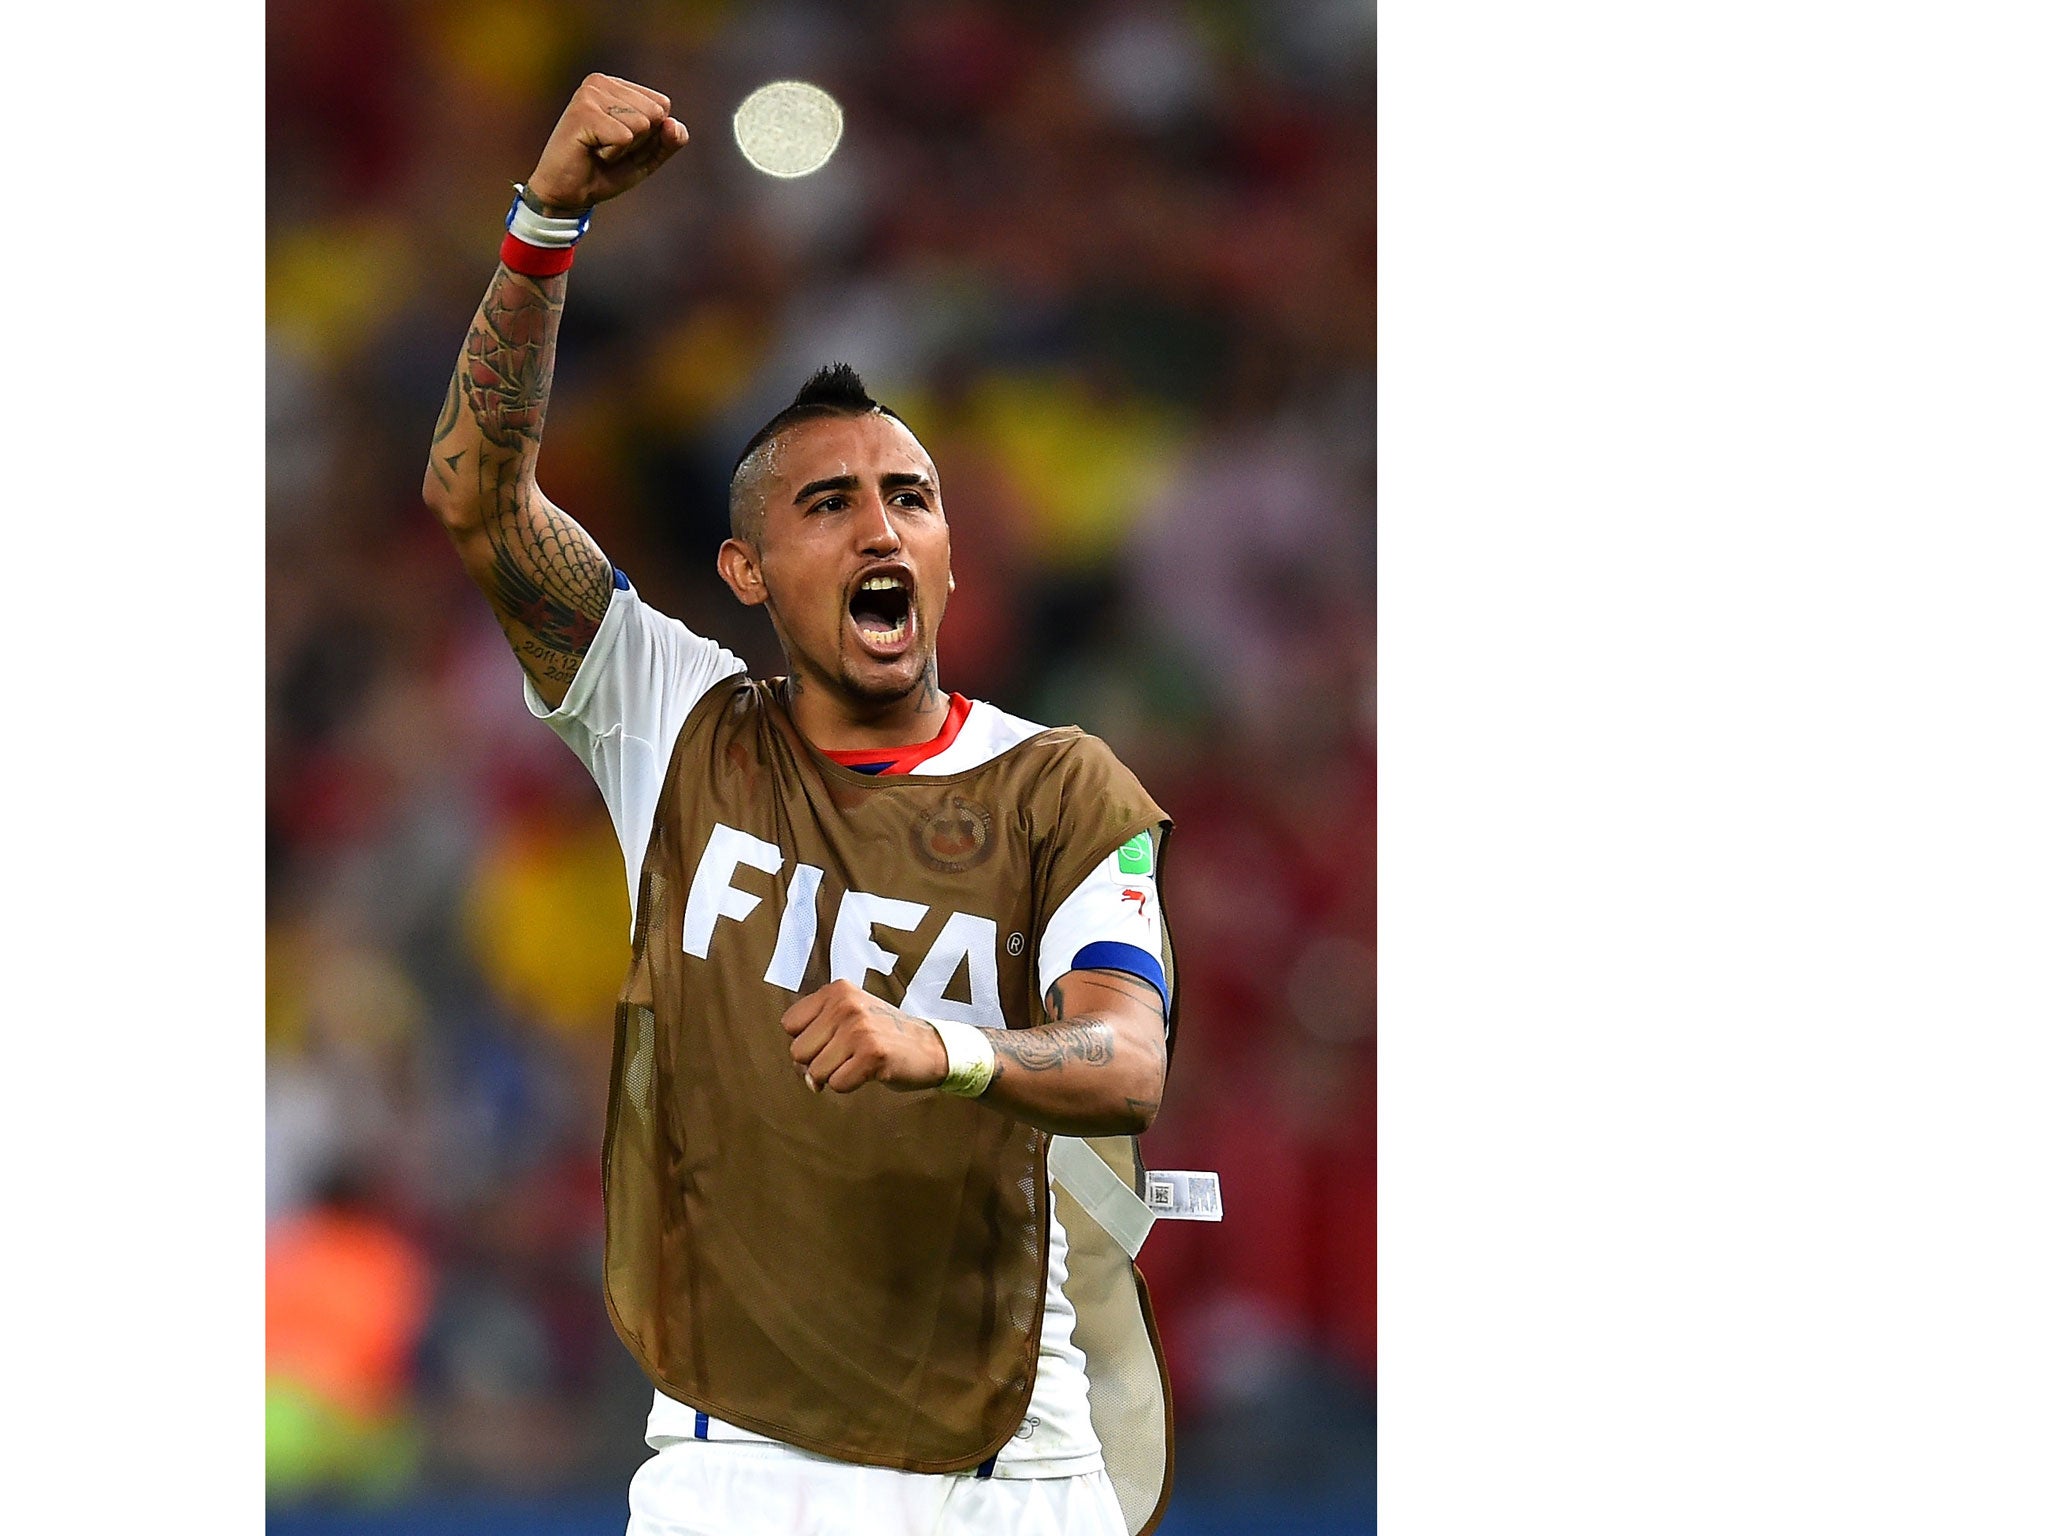 Juventus midfielder Arturo Vidal has been linked with Arsenal switch